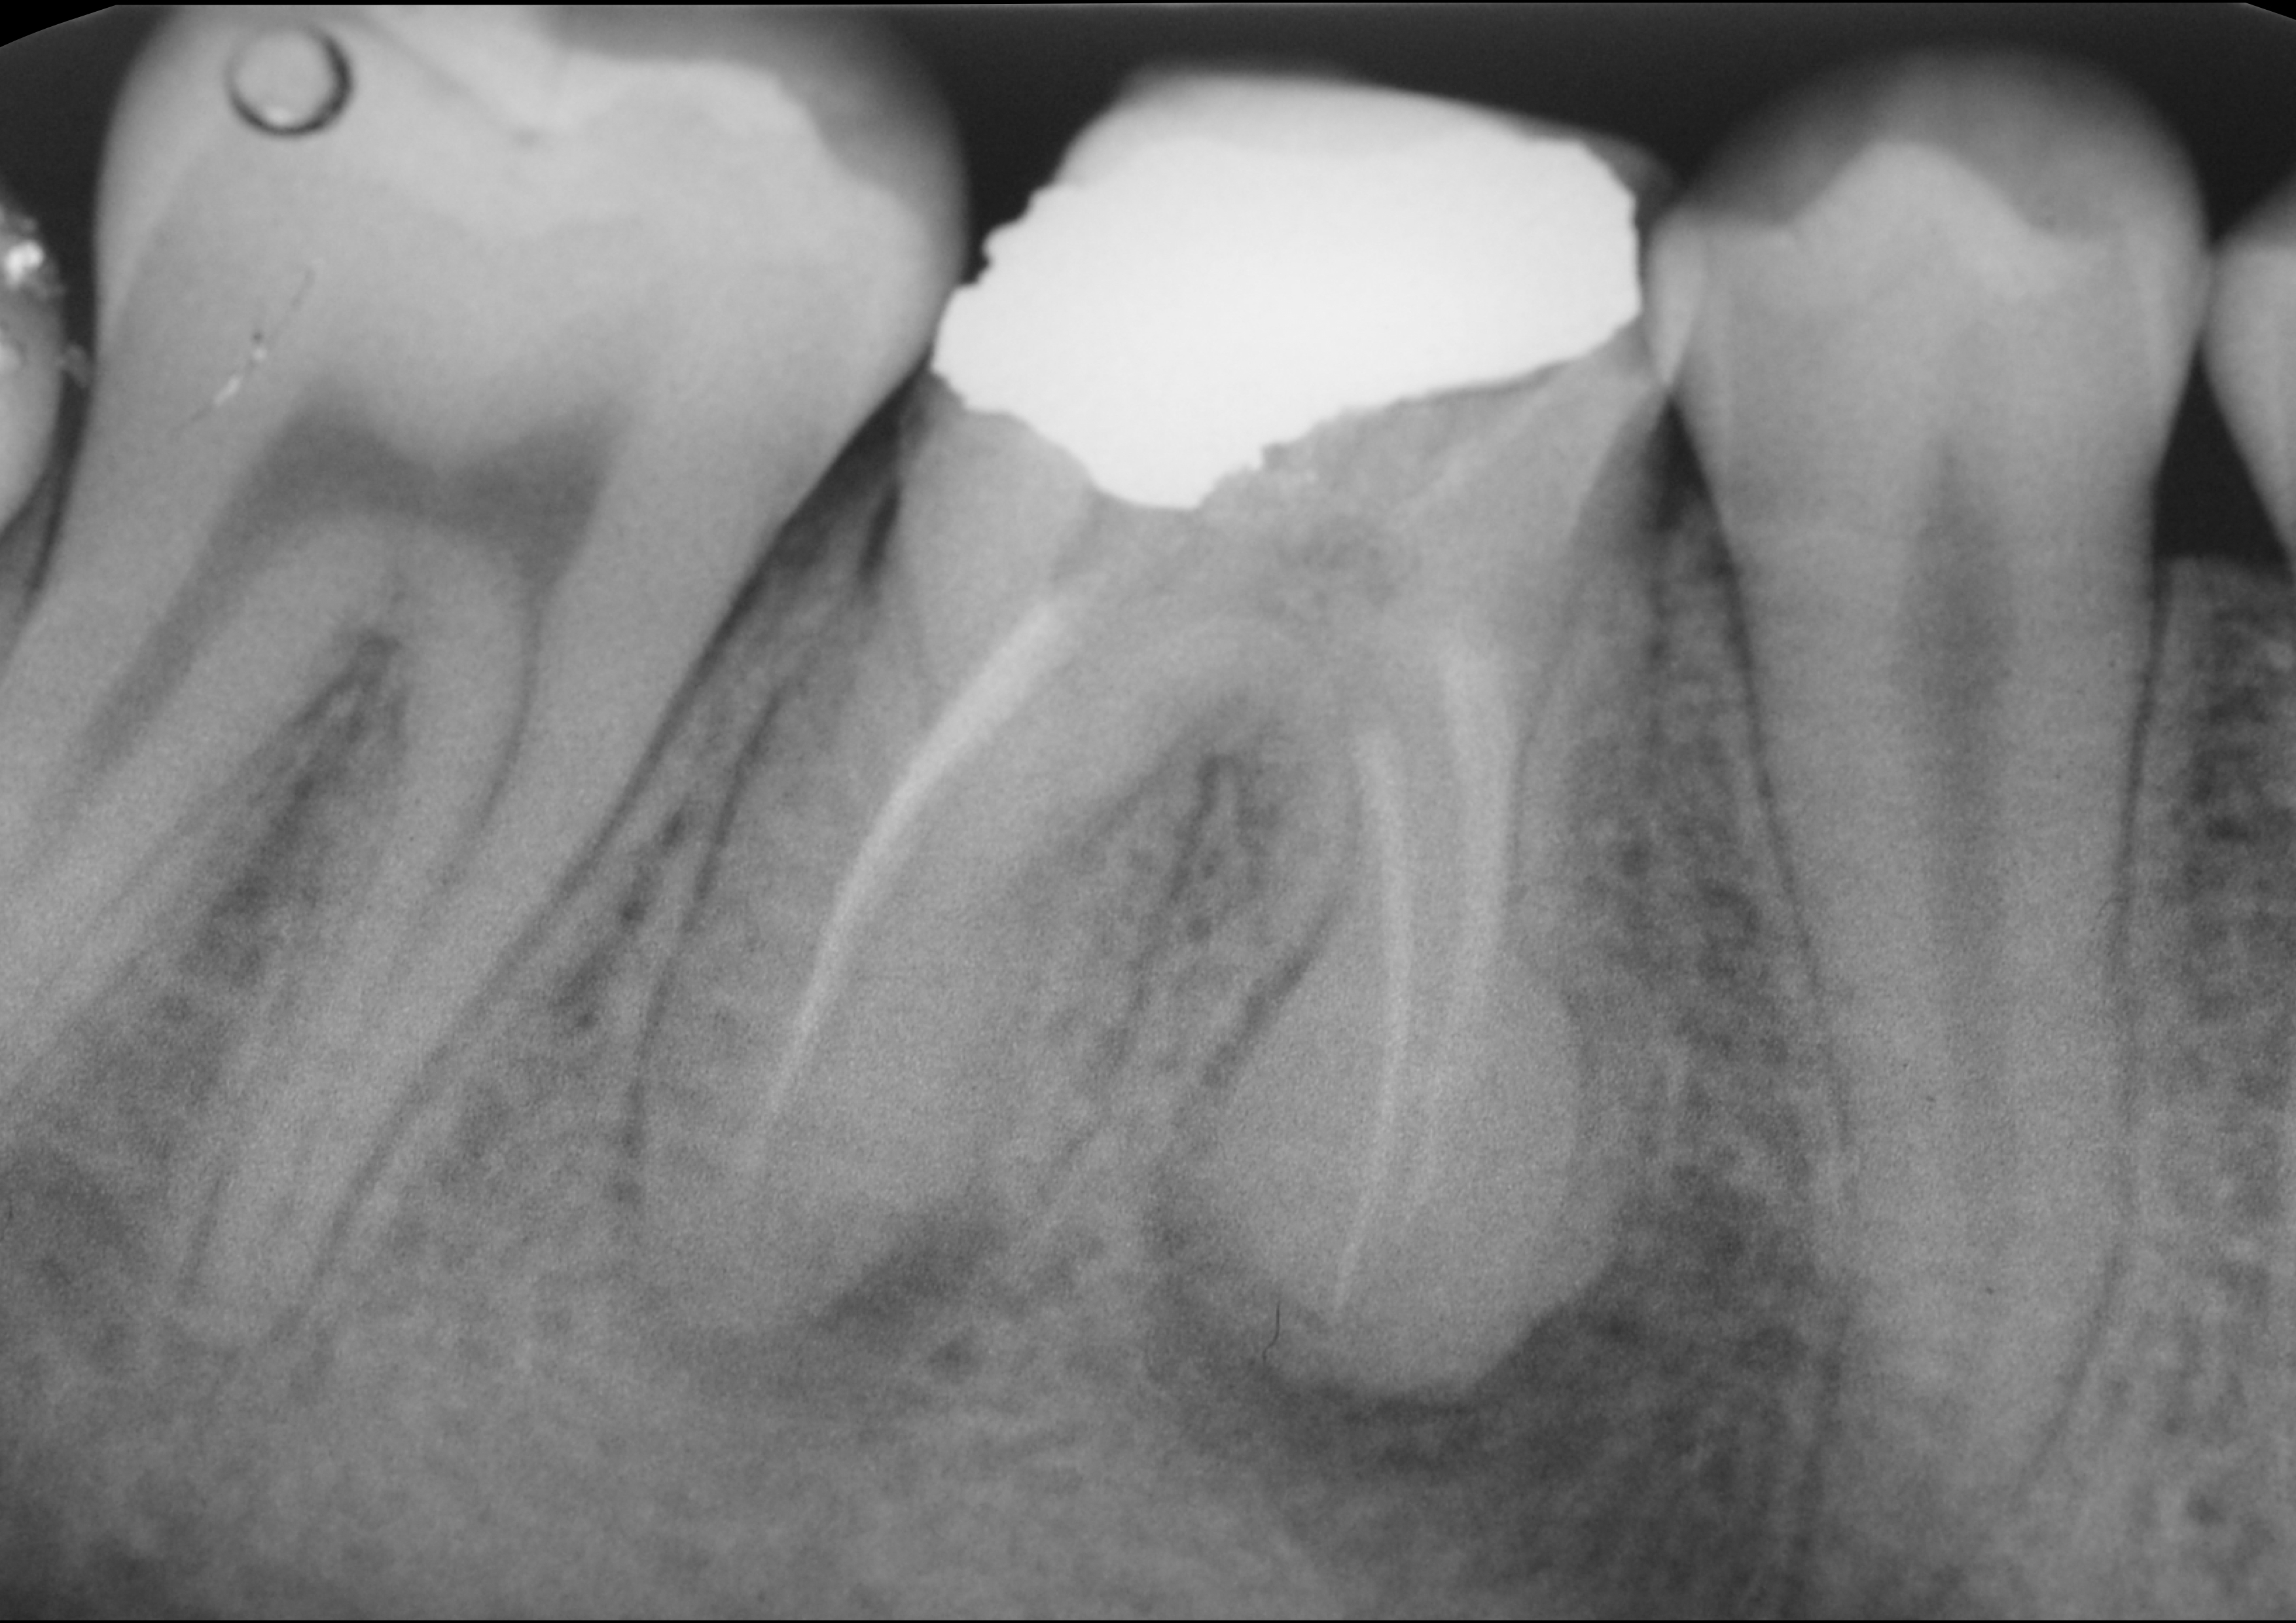 Fig. 1: Radiograph of the pre-op situation showing insufcient endodontic treatment of tooth #46. Additionally, an amalgam coronal restoration with microleakage was detected. There were also apical lesions evident around both roots. Both neighbouring teeth had migrated towards tooth #46 and closed the interproximal spaces.